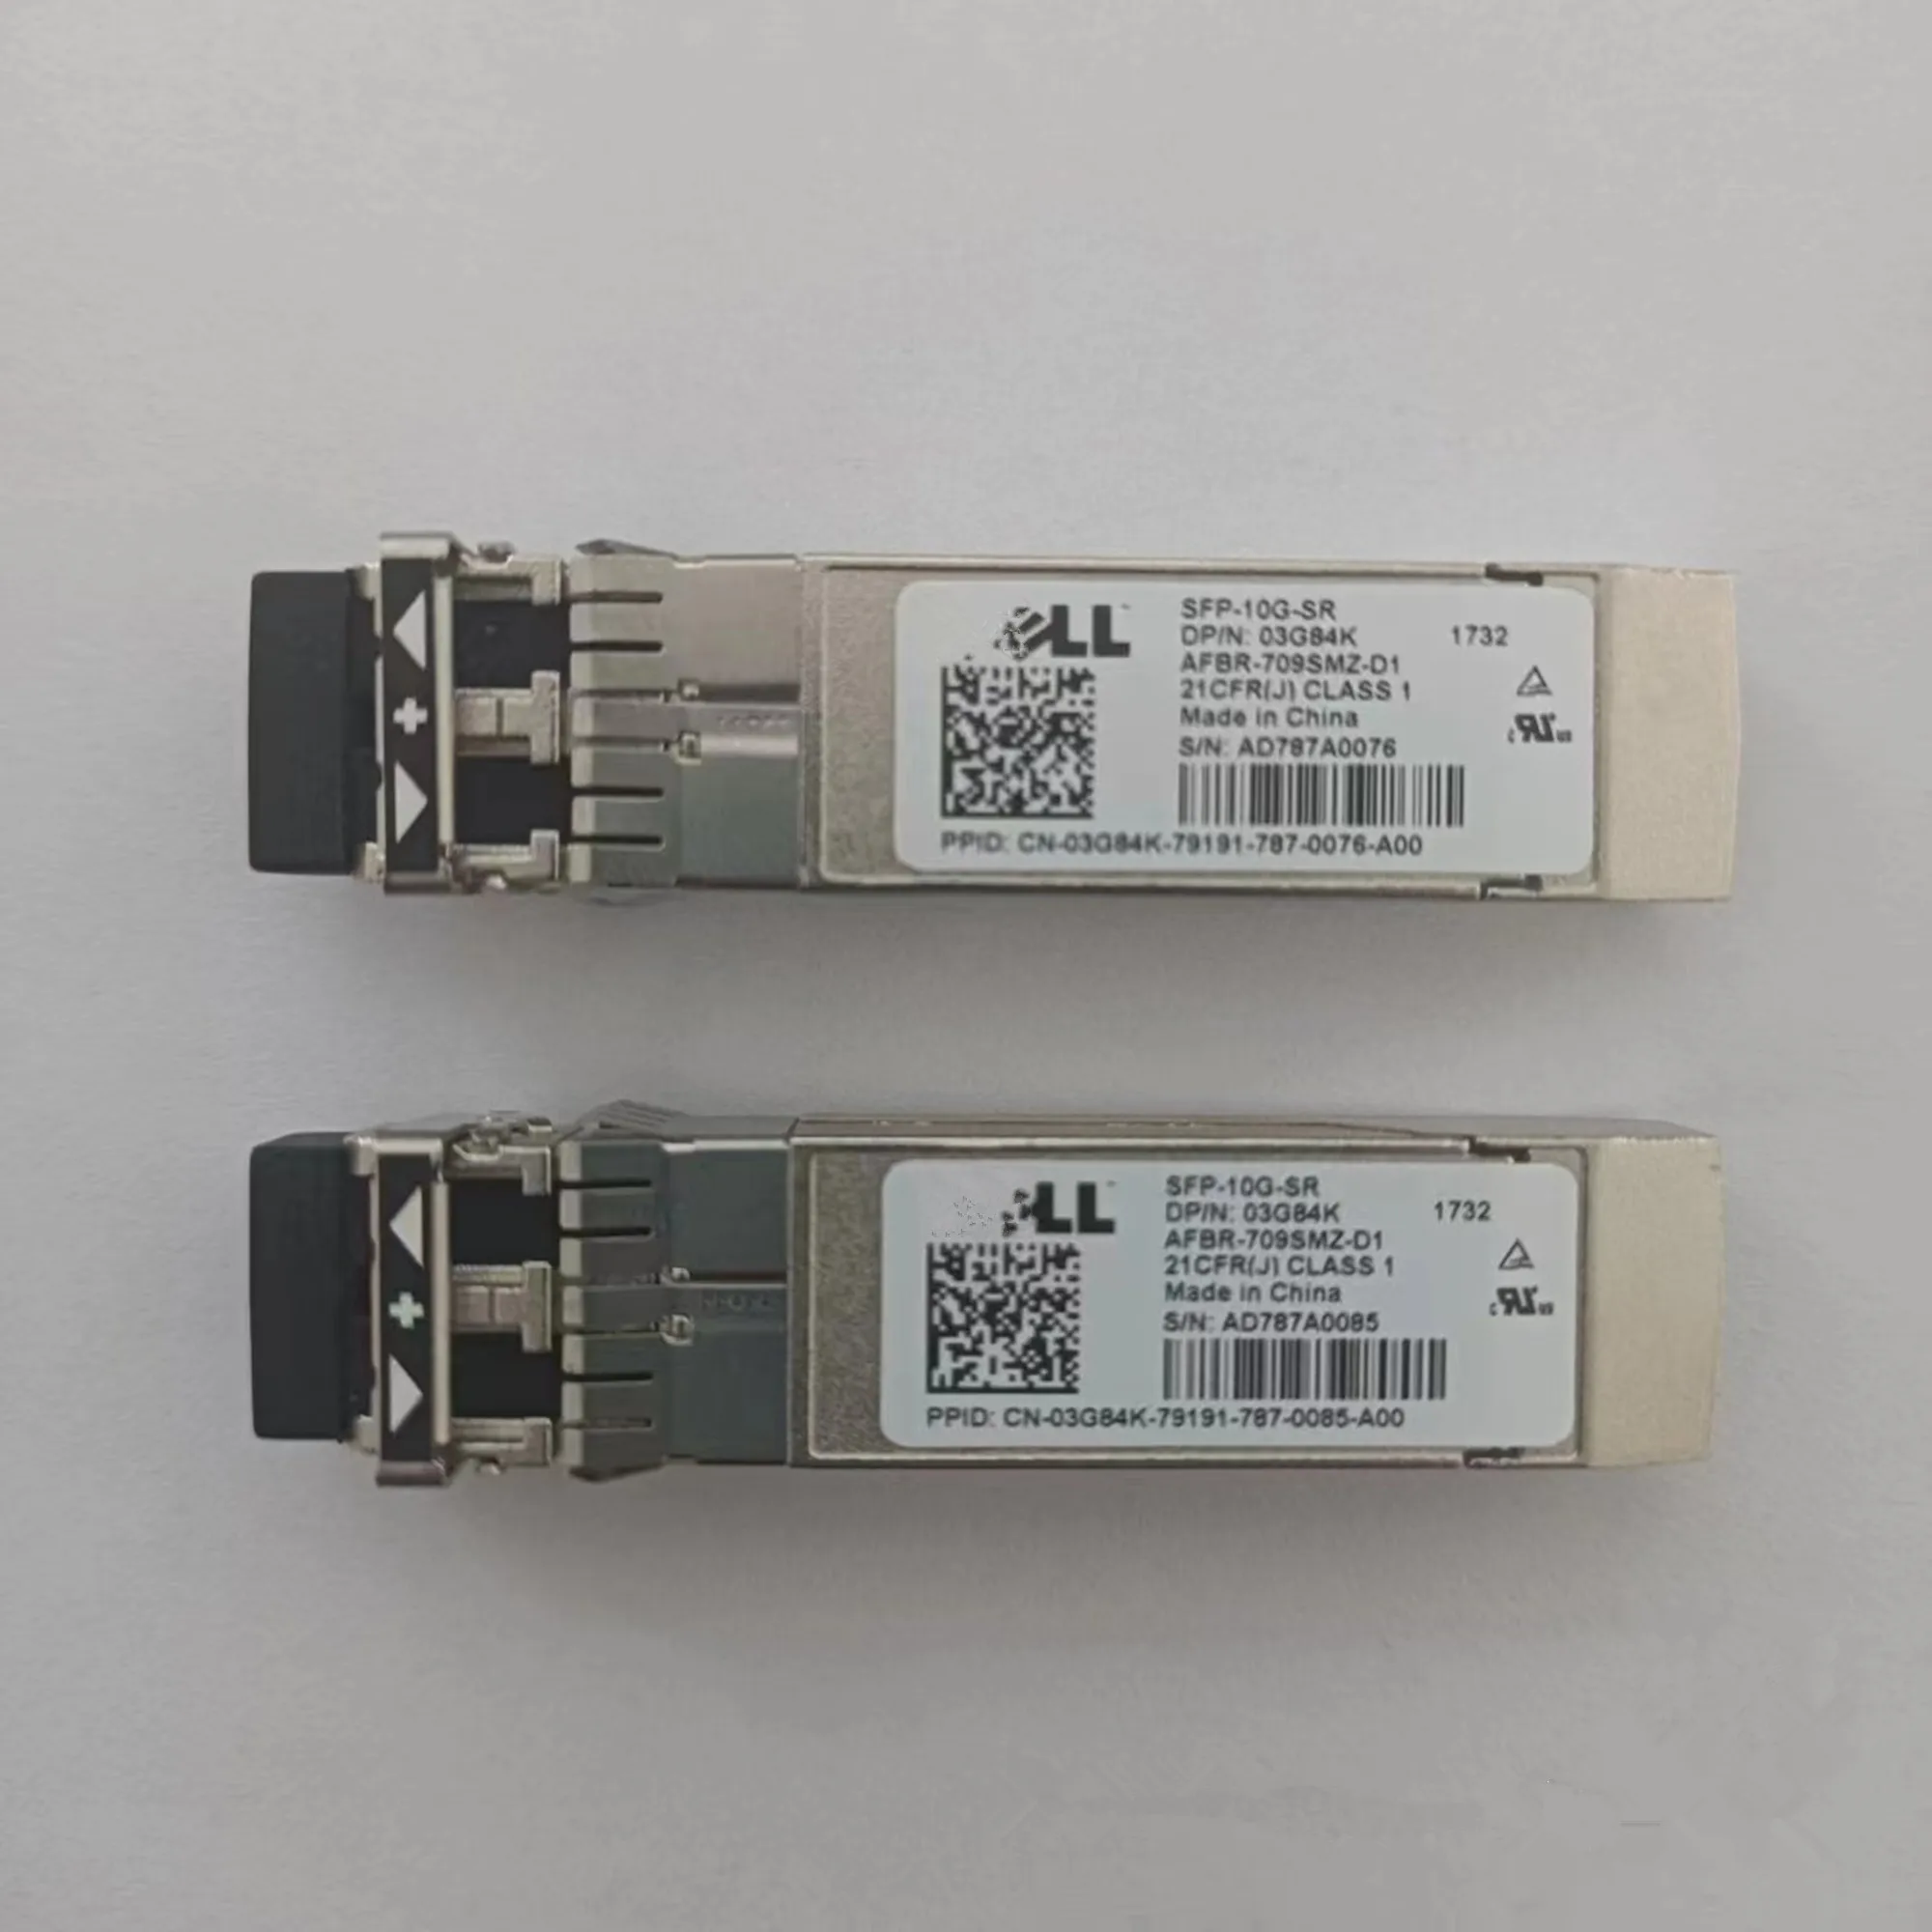 Del-I/AFBR-709SMZ-D1/03G84K/SFP-10G-SR/10Gbase-SR/850nm 300m 10g Transceiver/10g network adapter general switch reyee 10gbase sr sfp transceiver mm 850nm 300m lc